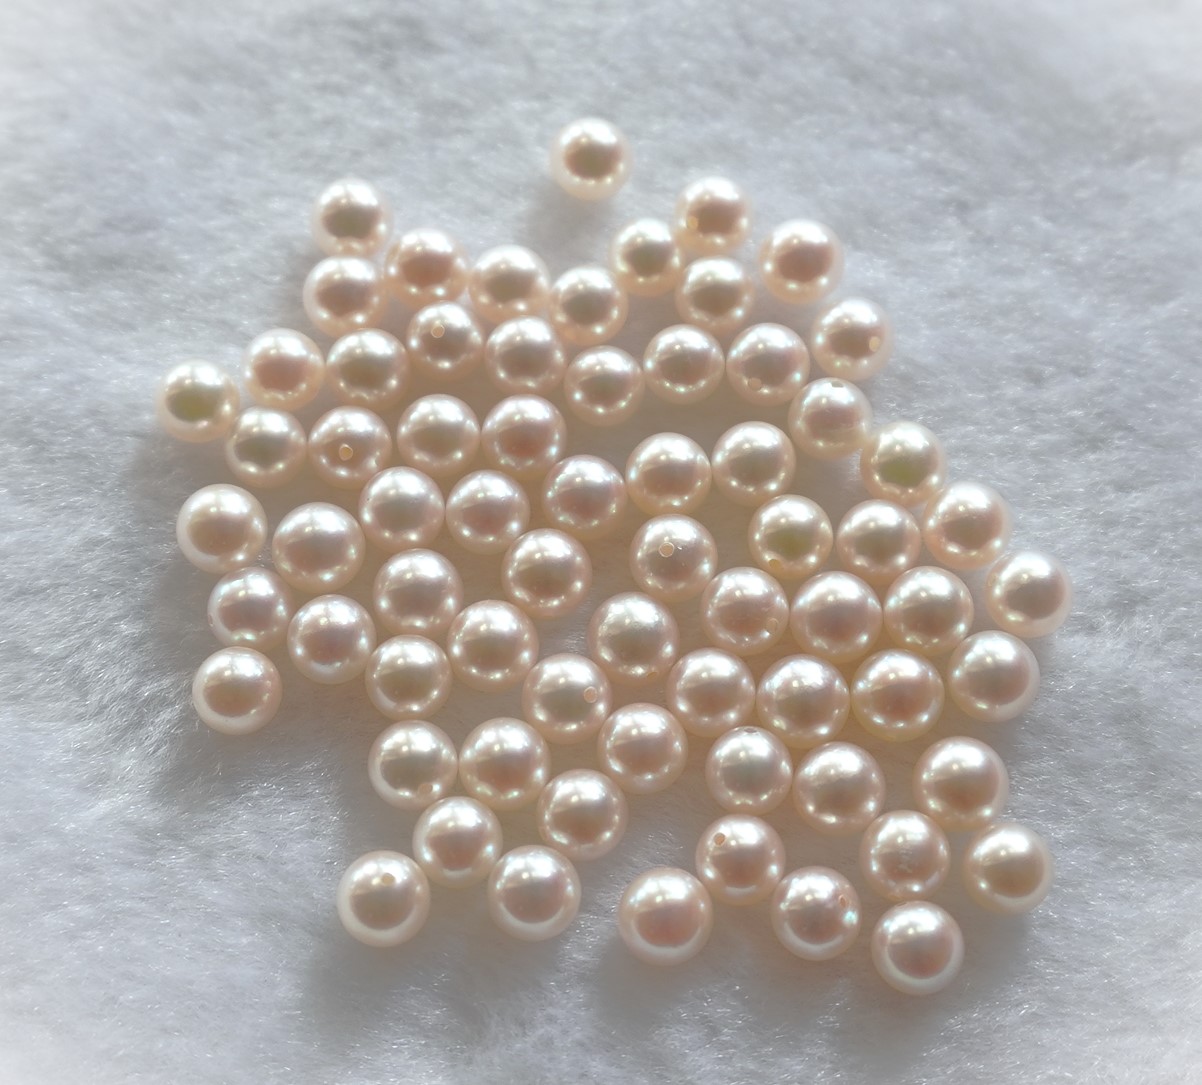 Japanese Akoya pearls AAA white 5.5-6mm top grade loose - Melbourne Pearls